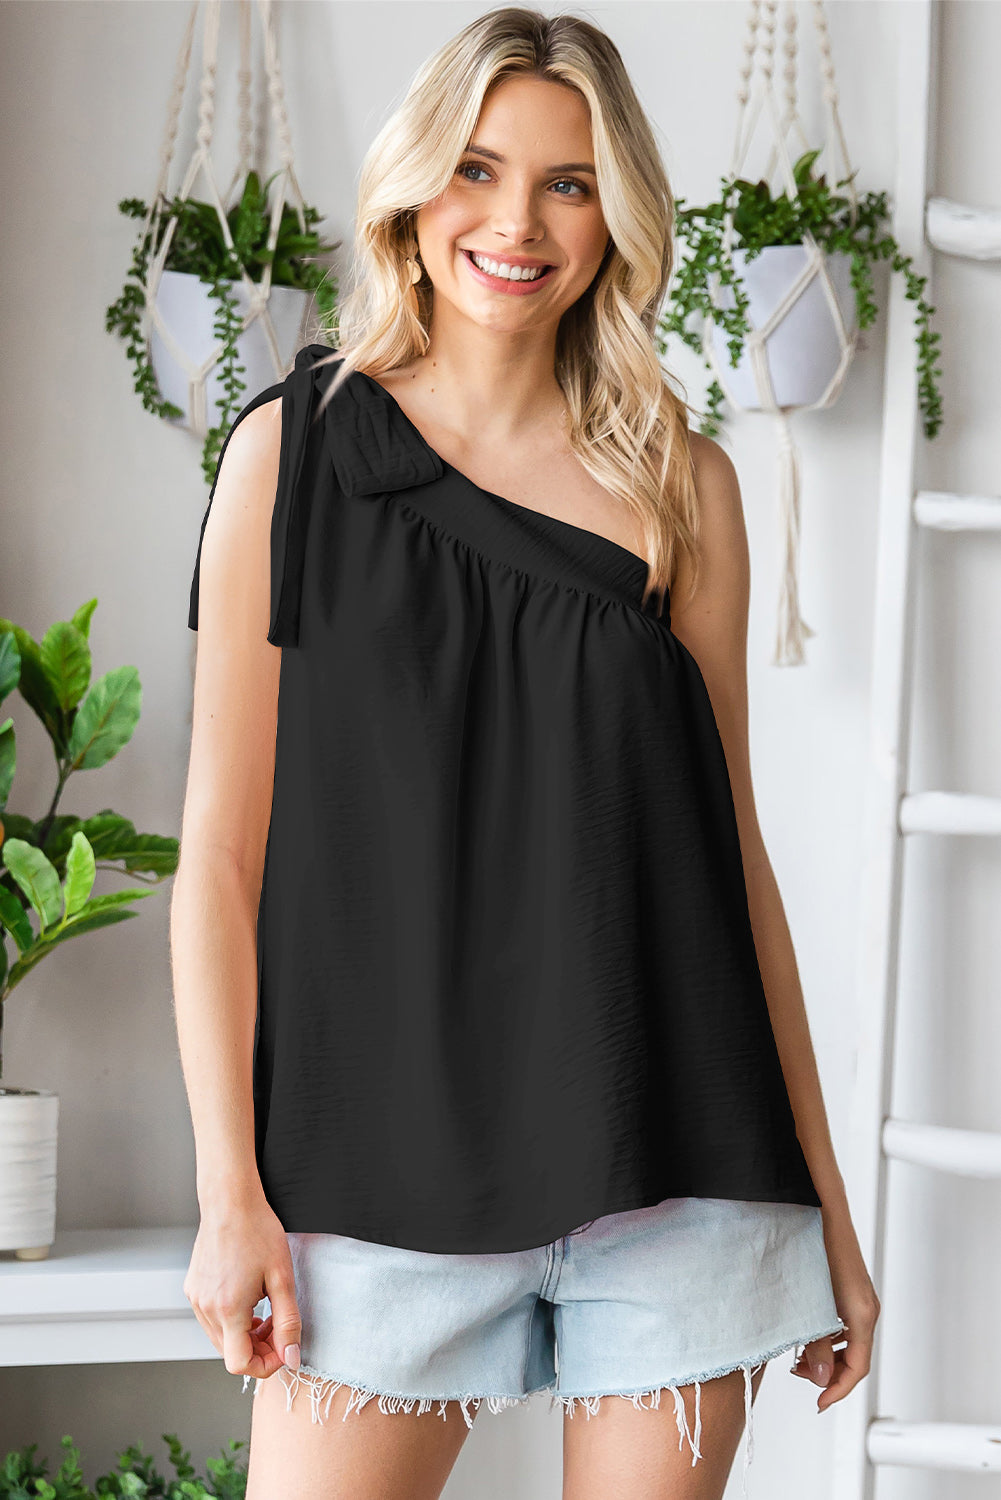 Tied Up in Bows One-Shoulder Top